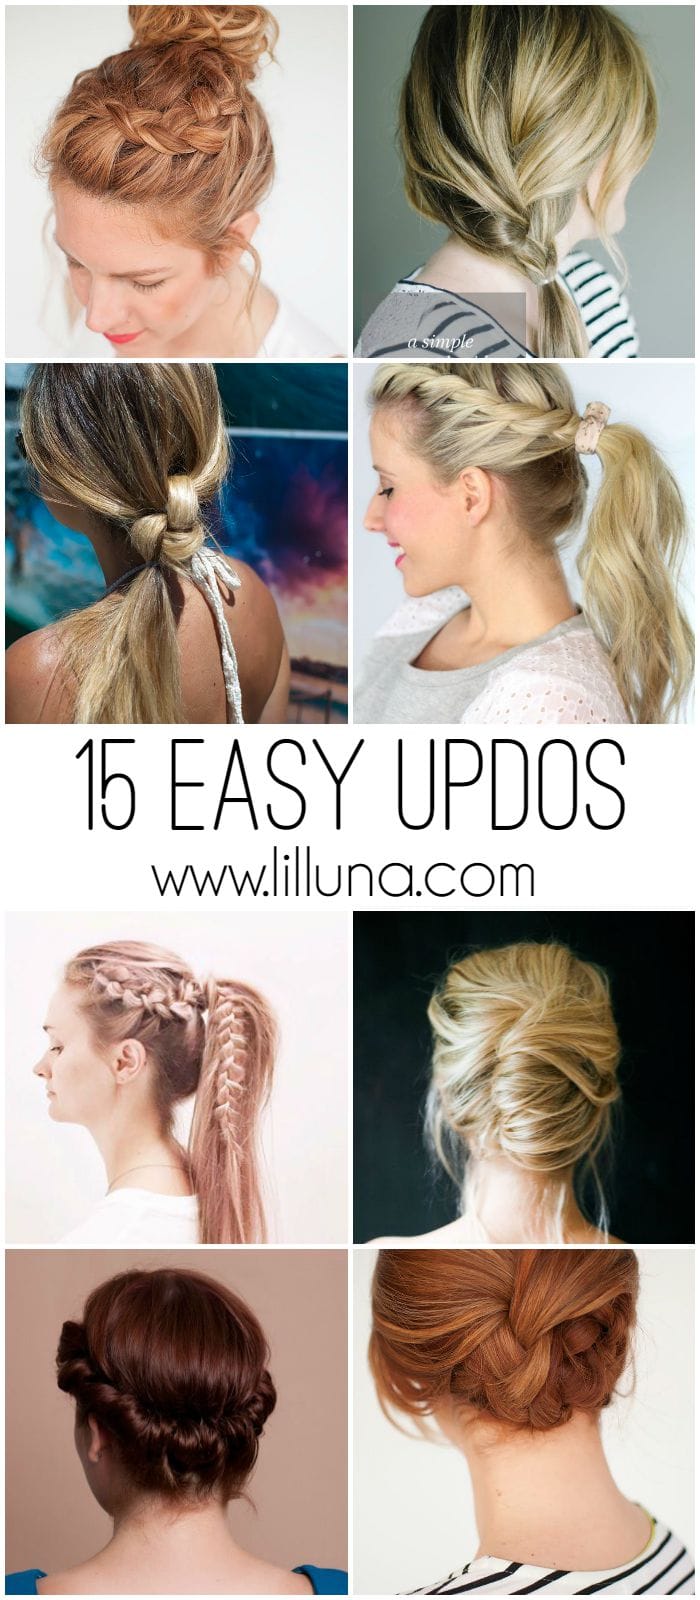 34 Honestly Good Heatless Hairstyles to Try out ...